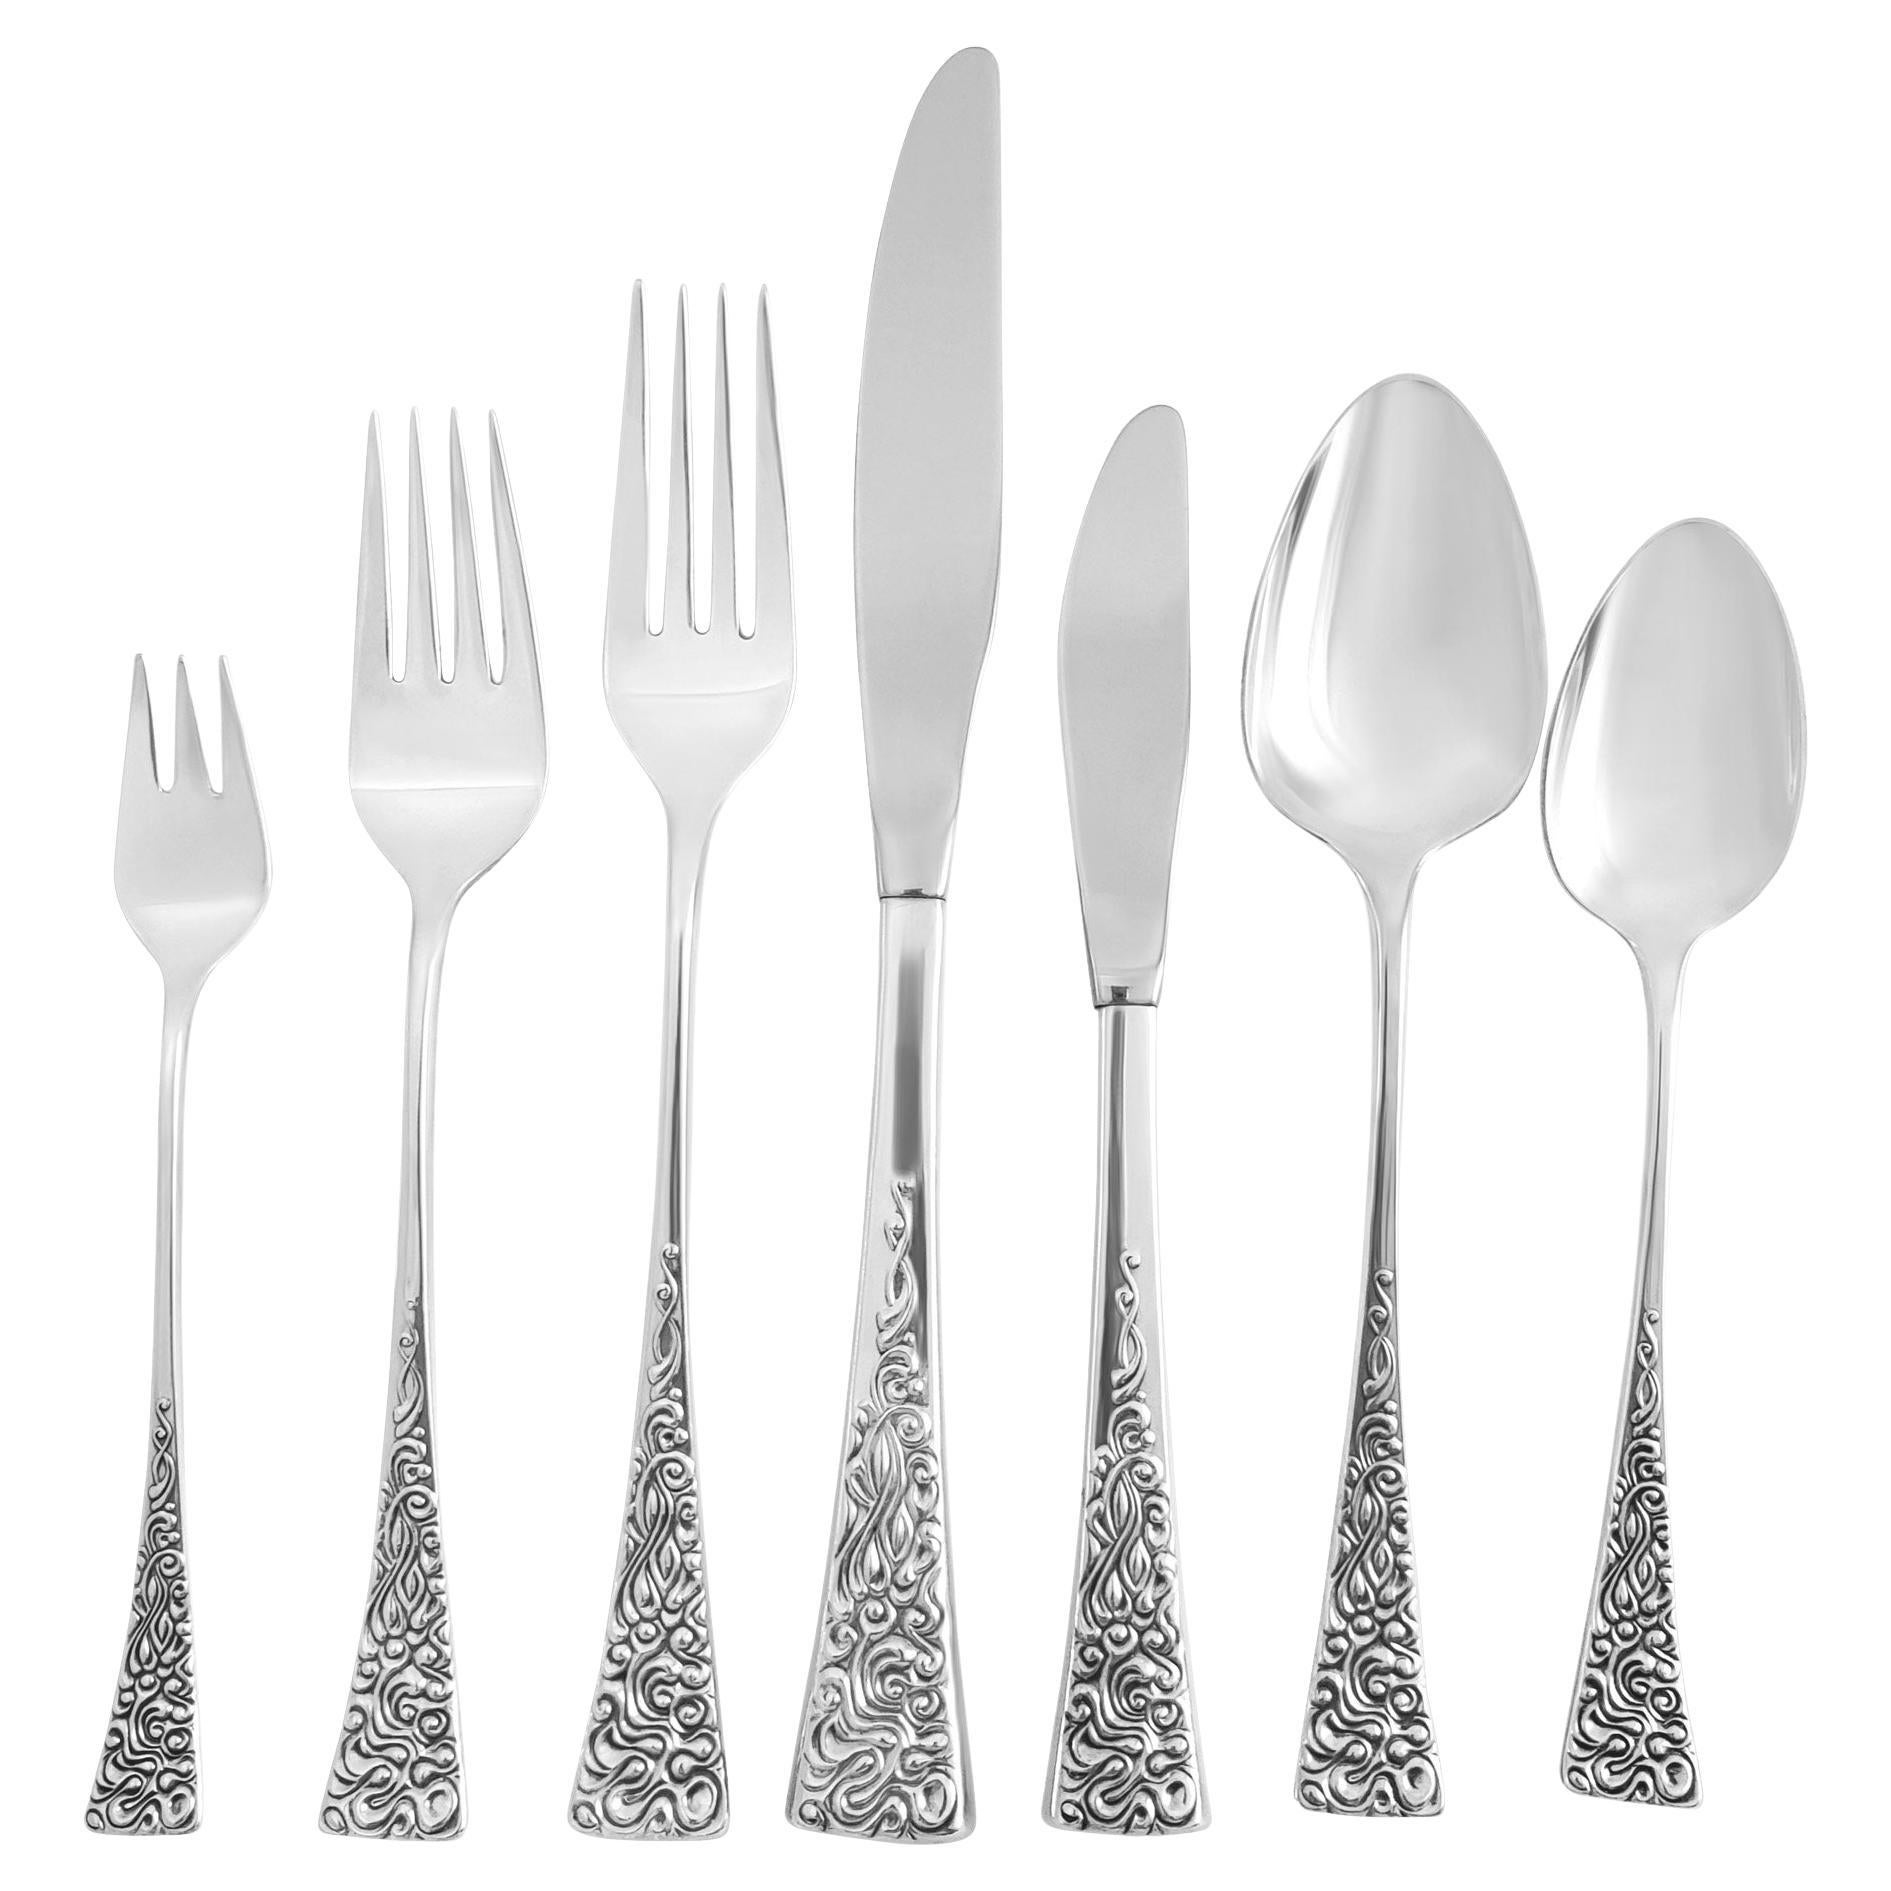 Sterling Silver Flatware Set Tapestry by Reed & Barton, Patented in 1964- 7